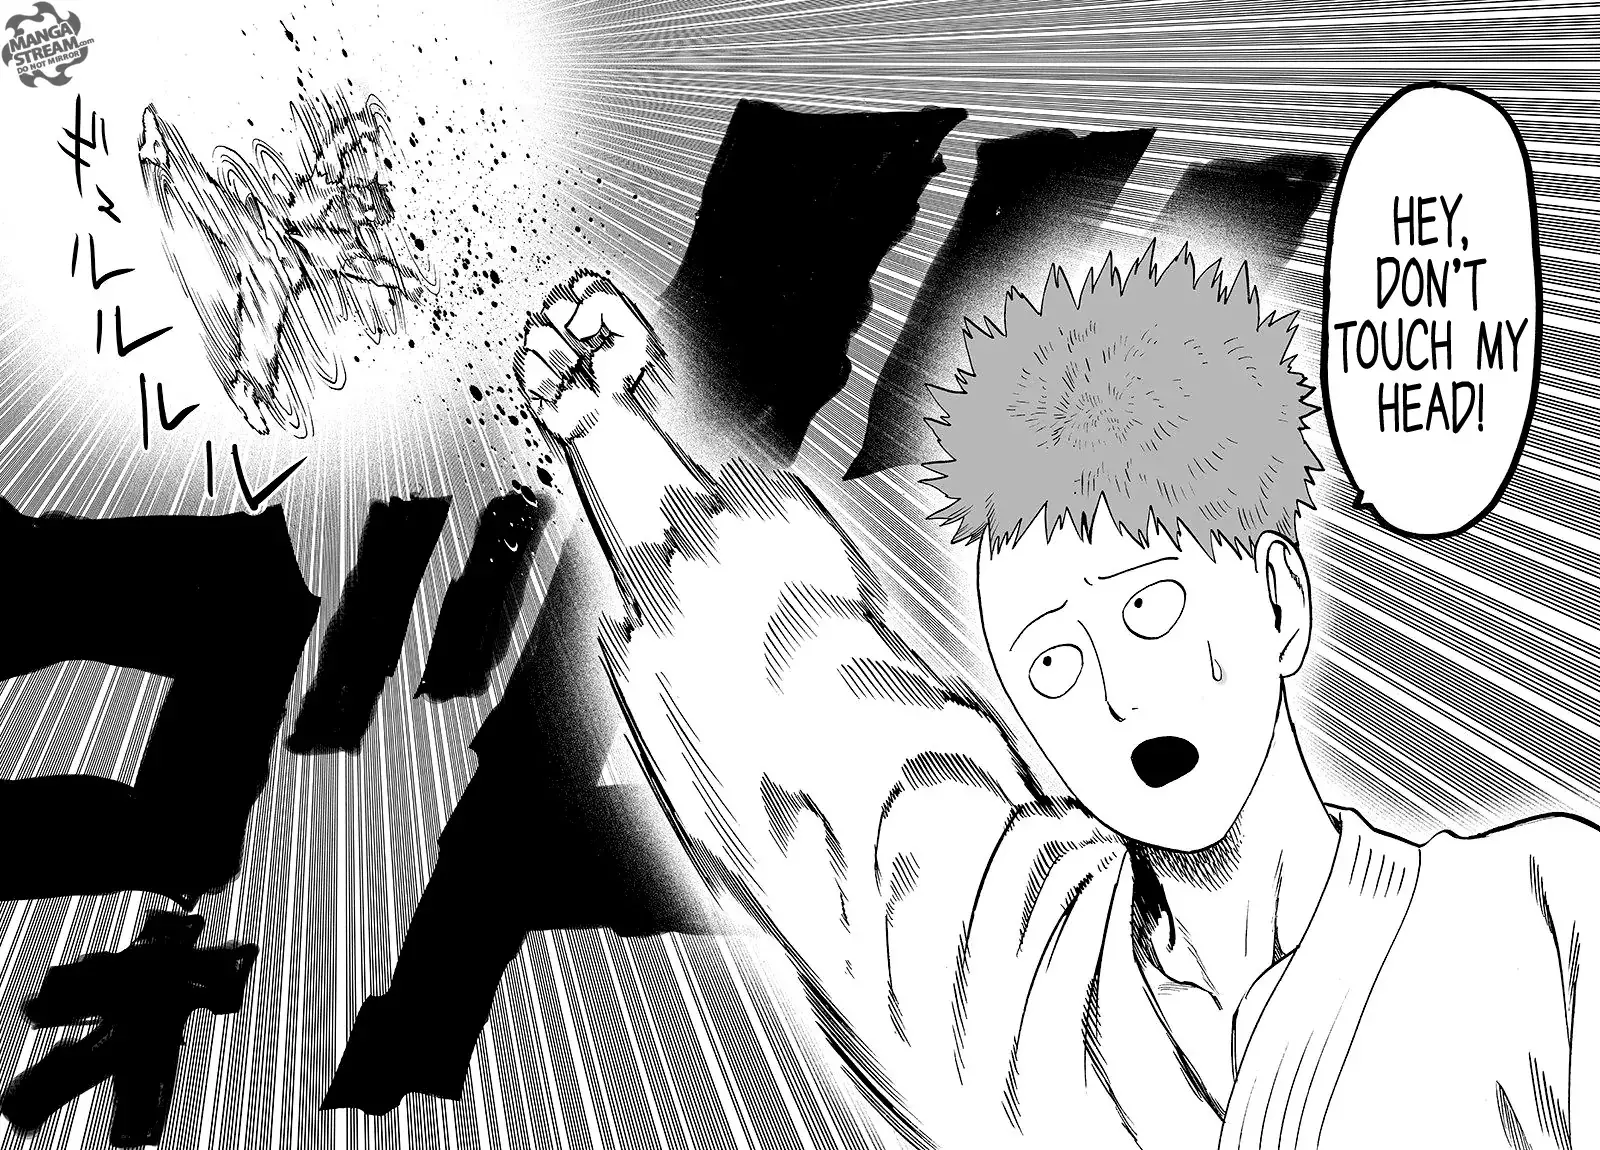 One Punch Man Chapter 64.1, READ One Punch Man Chapter 64.1 ONLINE, lost in the cloud genre,lost in the cloud gif,lost in the cloud girl,lost in the cloud goods,lost in the cloud goodreads,lost in the cloud,lost ark cloud gaming,lost odyssey cloud gaming,lost in the cloud fanart,lost in the cloud fanfic,lost in the cloud fandom,lost in the cloud first kiss,lost in the cloud font,lost in the cloud ending,lost in the cloud episode 97,lost in the cloud edit,lost in the cloud explained,lost in the cloud dog,lost in the cloud discord server,lost in the cloud desktop wallpaper,lost in the cloud drawing,can't find my cloud on network,lost in the cloud characters,lost in the cloud chapter 93 release date,lost in the cloud birthday,lost in the cloud birthday art,lost in the cloud background,lost in the cloud banner,lost in the clouds meaning,what is the black cloud in lost,lost in the cloud ao3,lost in the cloud anime,lost in the cloud art,lost in the cloud author twitter,lost in the cloud author instagram,lost in the cloud artist,lost in the cloud acrylic stand,lost in the cloud artist twitter,lost in the cloud art style,lost in the cloud analysis